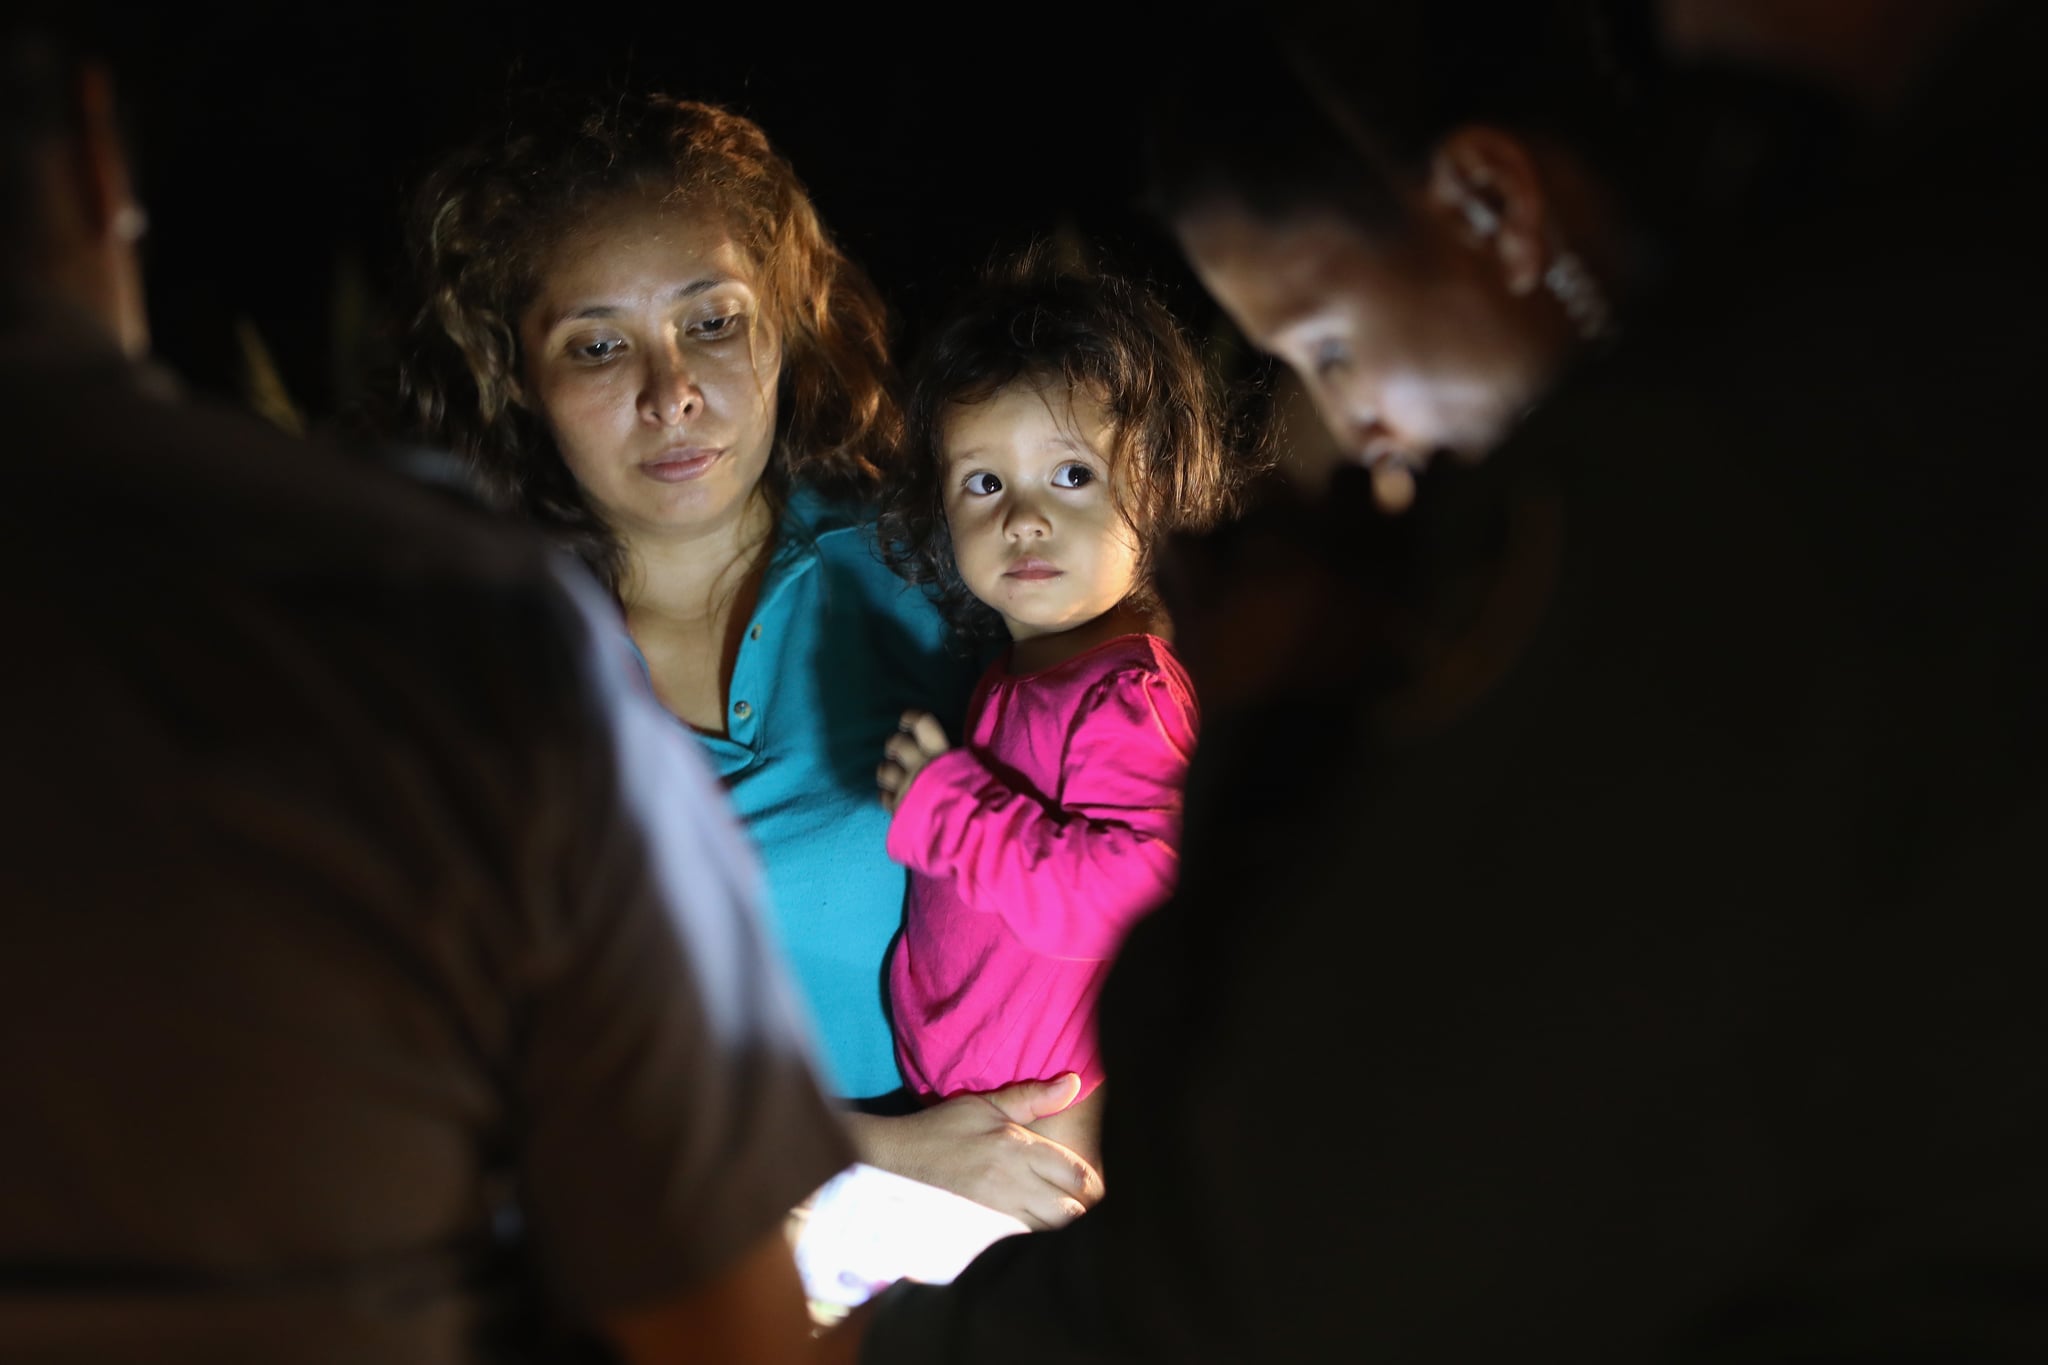 MCALLEN, TX - JUNE 12:  Central American asylum seekers, including a Honduran girl, 2, and her mother, are taken into custody near the U.S.-Mexico border on June 12, 2018 in McAllen, Texas. The group of women and children had rafted across the Rio Grande from Mexico and were detained by U.S. Border Patrol agents before being sent to a processing center for possible separation. Customs and Border Protection (CBP) is executing the Trump administration's zero tolerance policy towards undocumented immigrants. U.S. Attorney General Jeff Sessions also said that domestic and gang violence in immigrants' country of origin would no longer qualify them for political asylum status.  (Photo by John Moore/Getty Images)